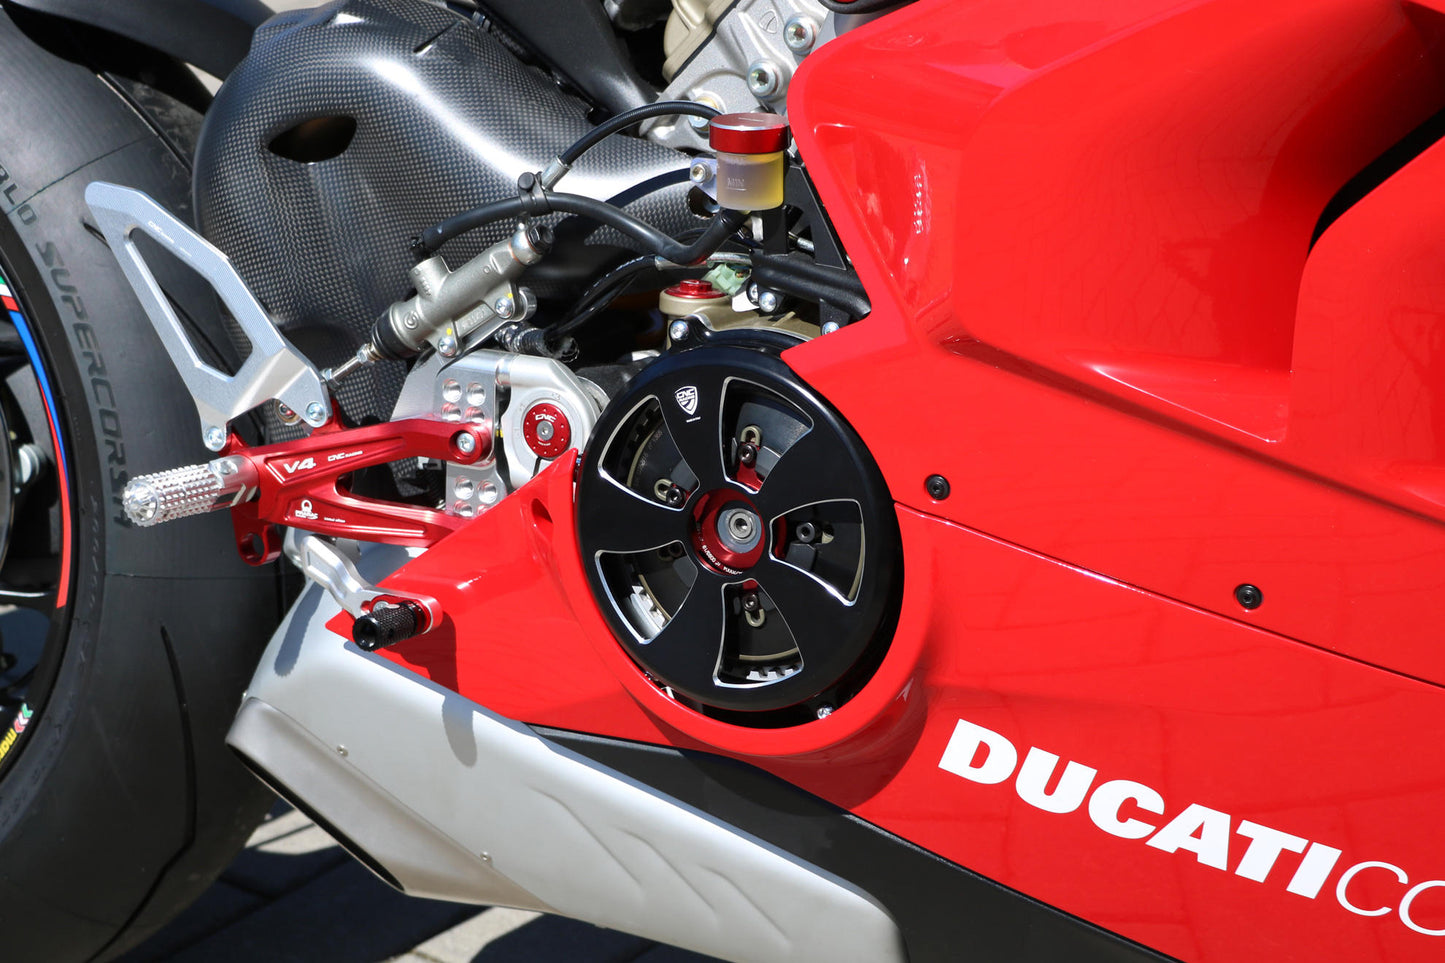 Panigale V4R - Dry Clutch Cover - Averys Motorcycles